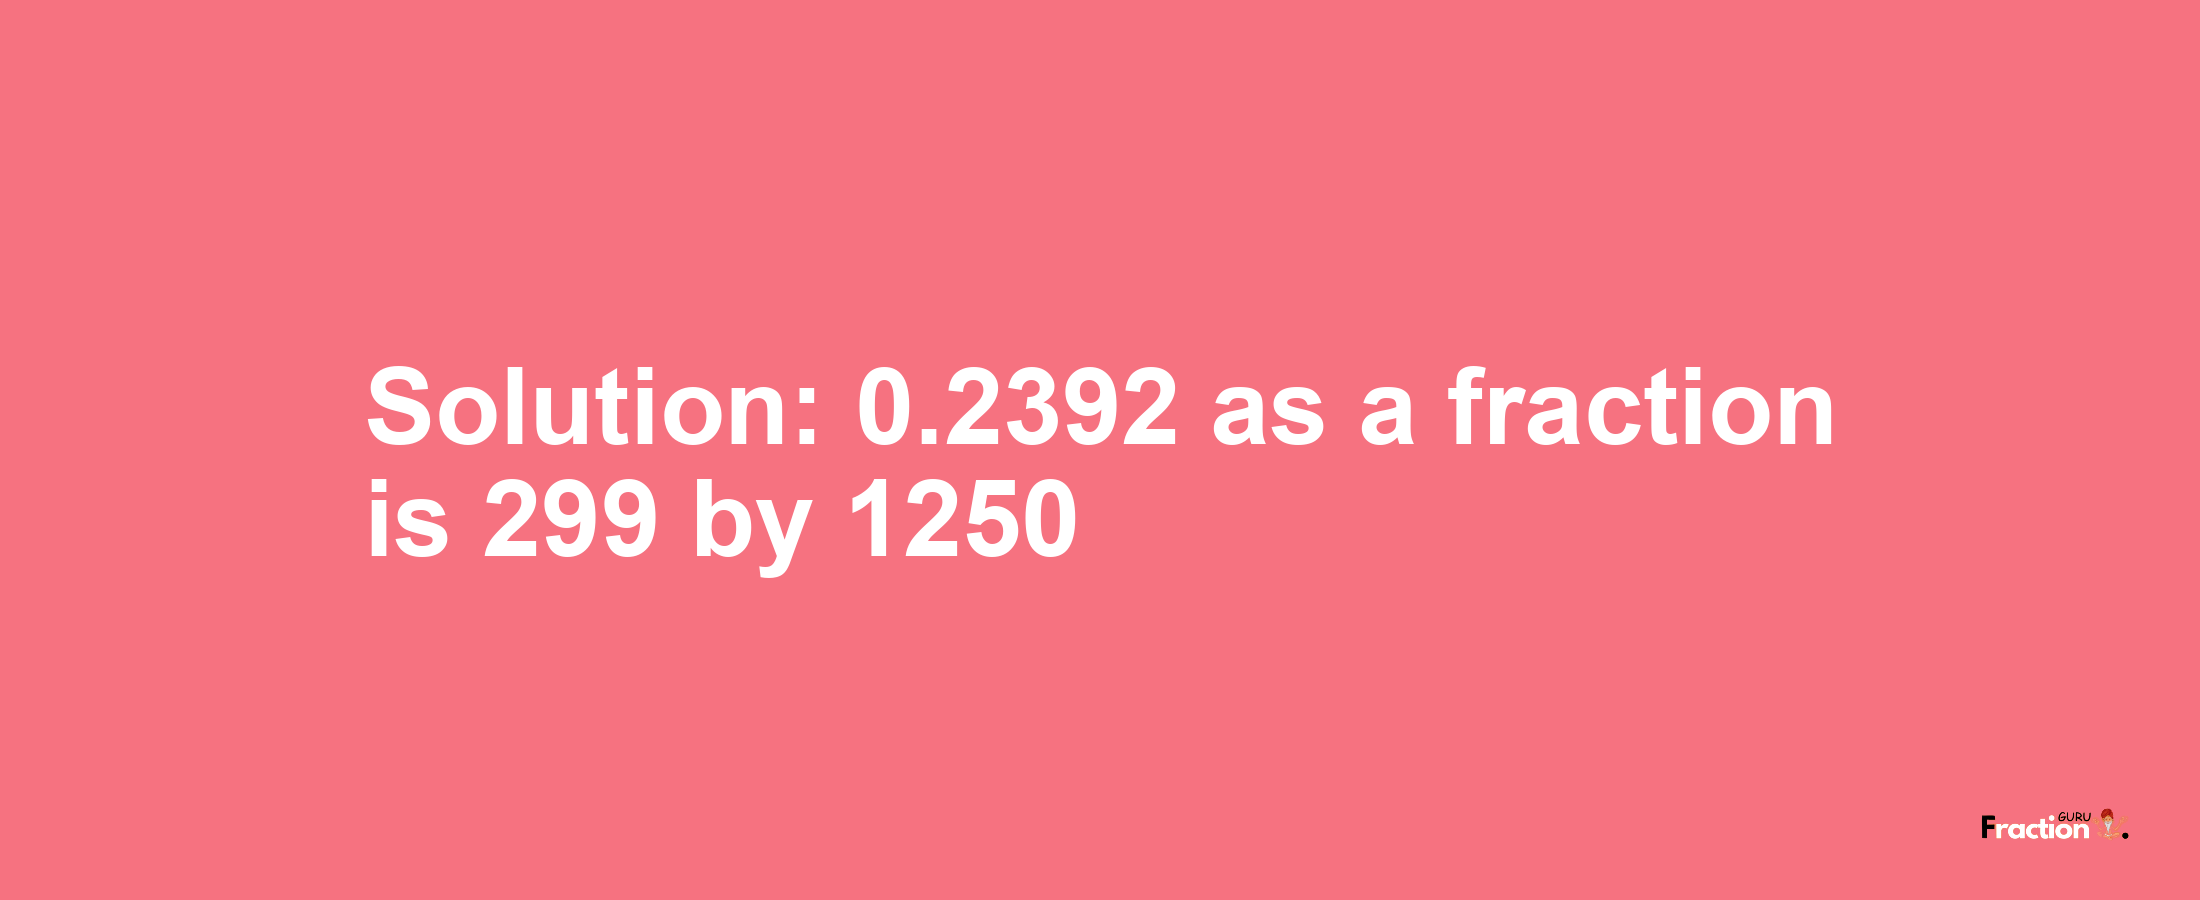 Solution:0.2392 as a fraction is 299/1250